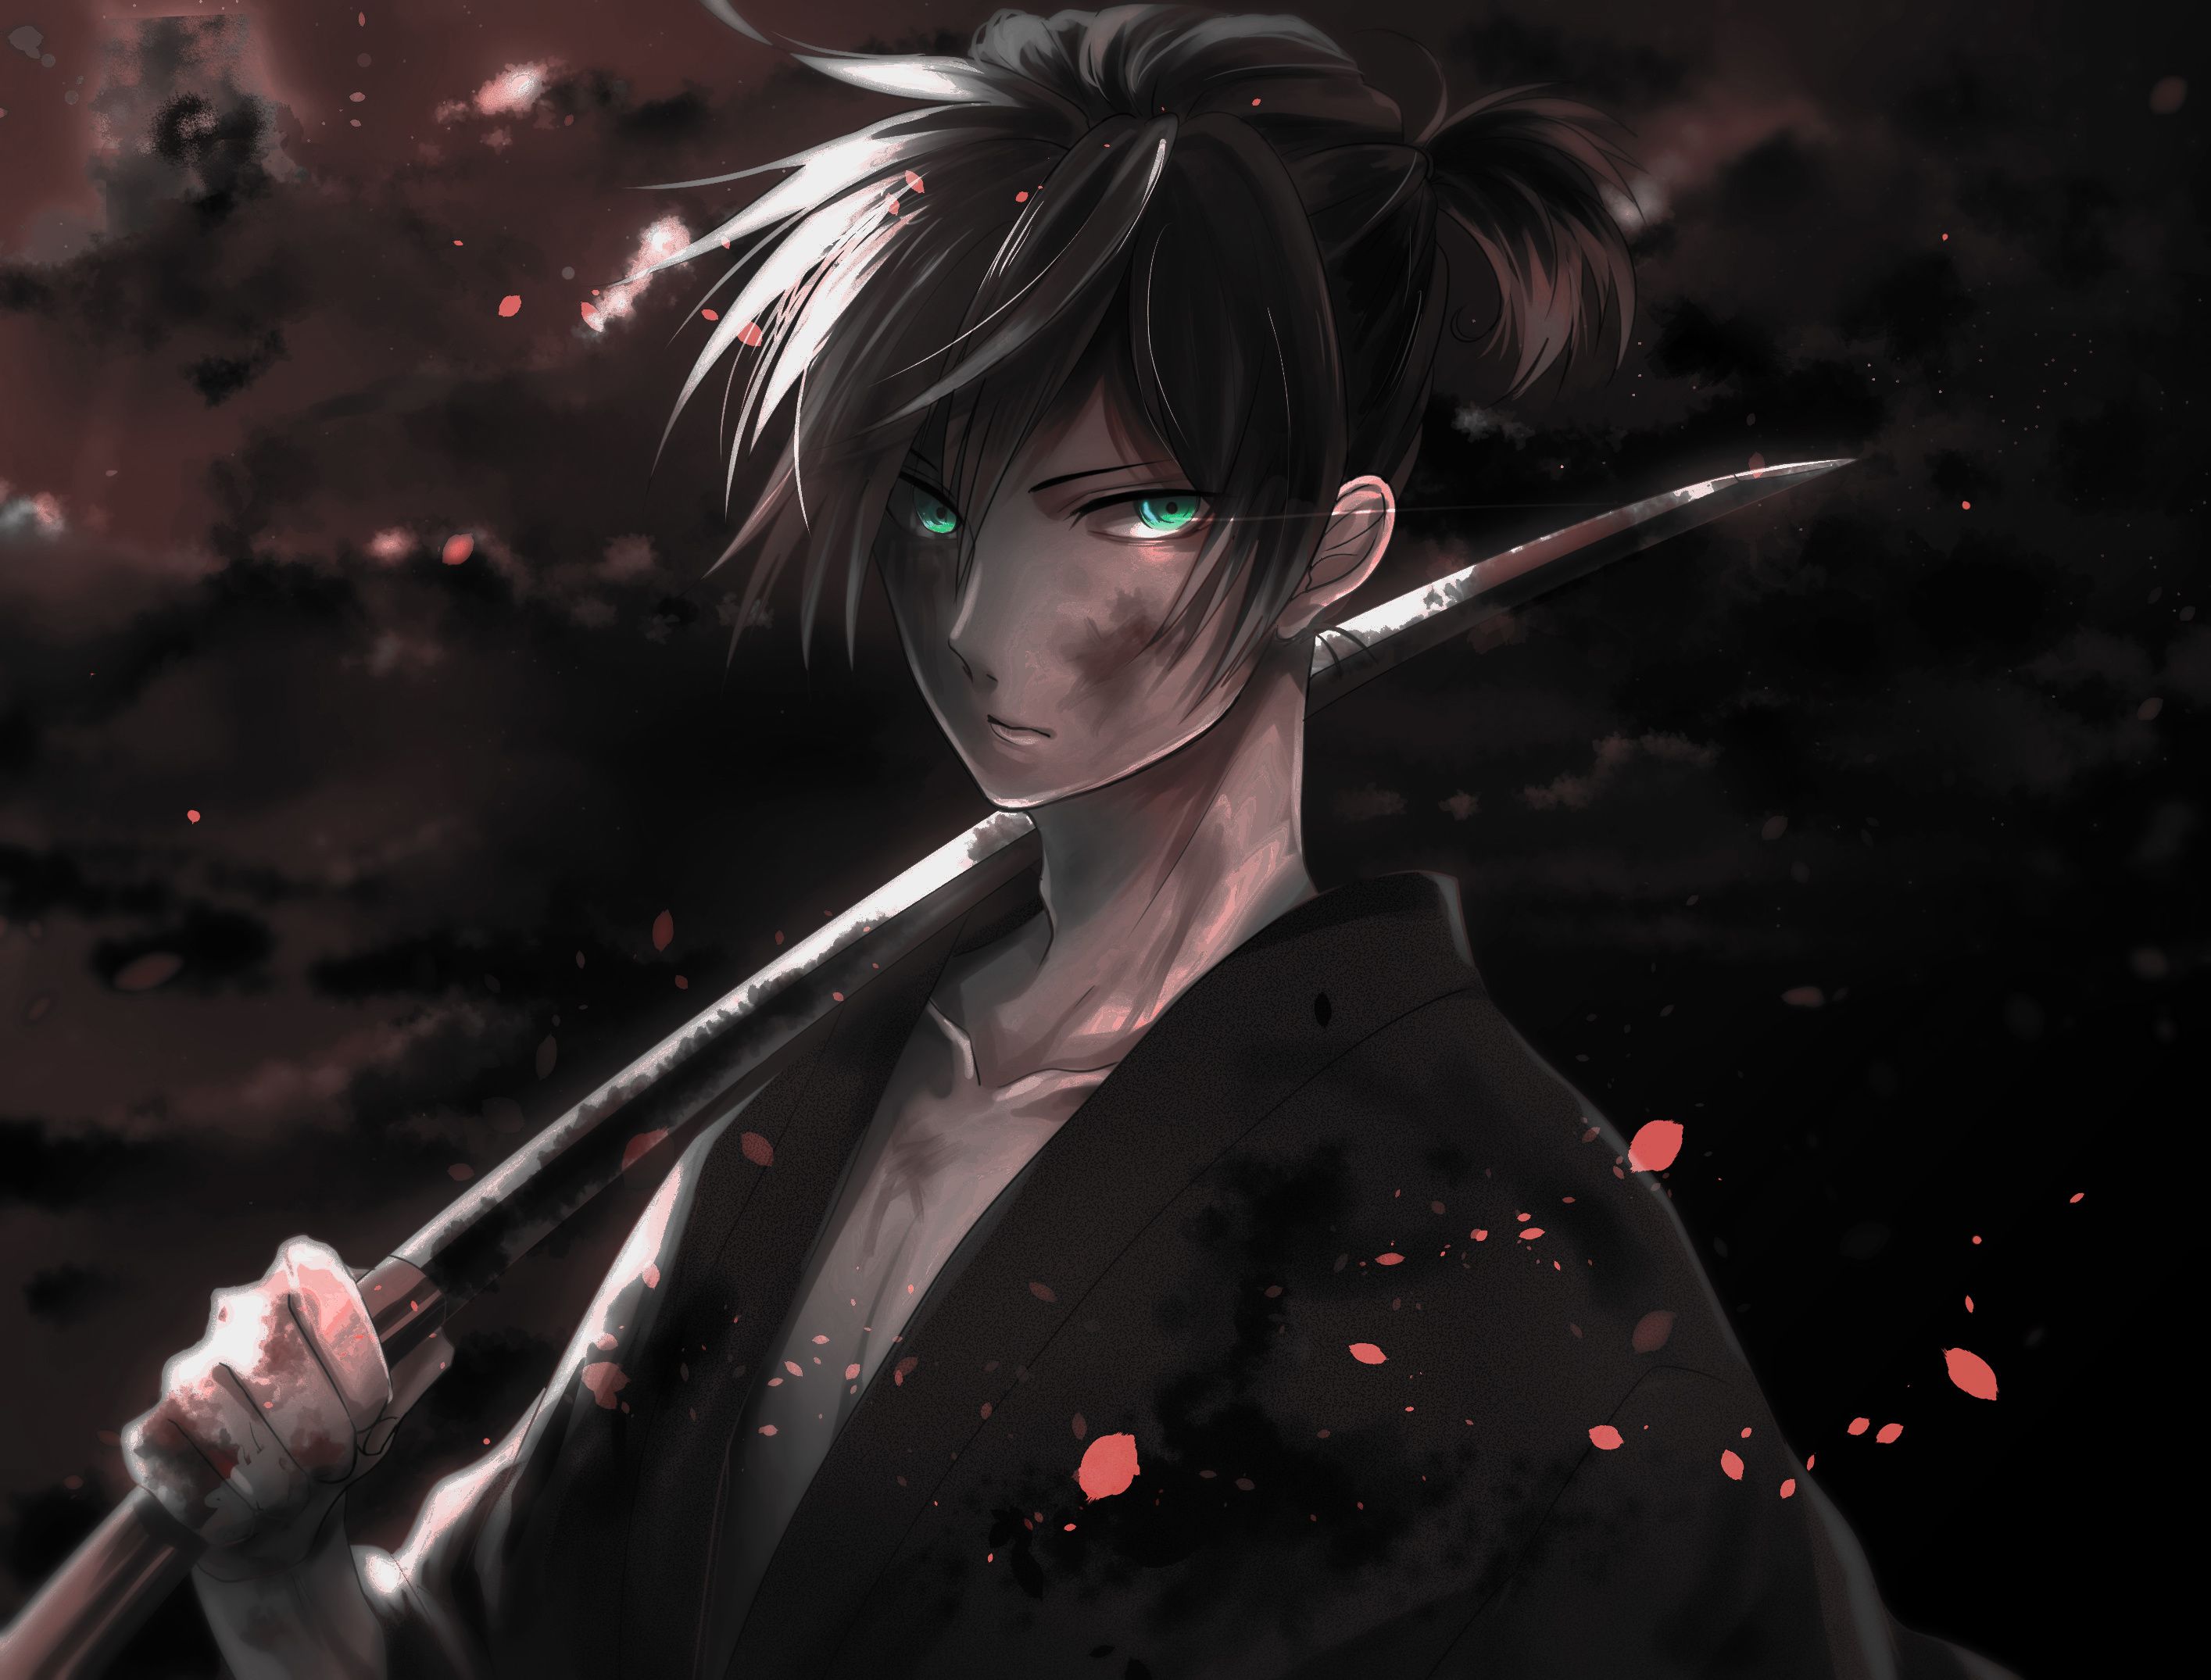 2. "Yato" from Noragami - wide 1